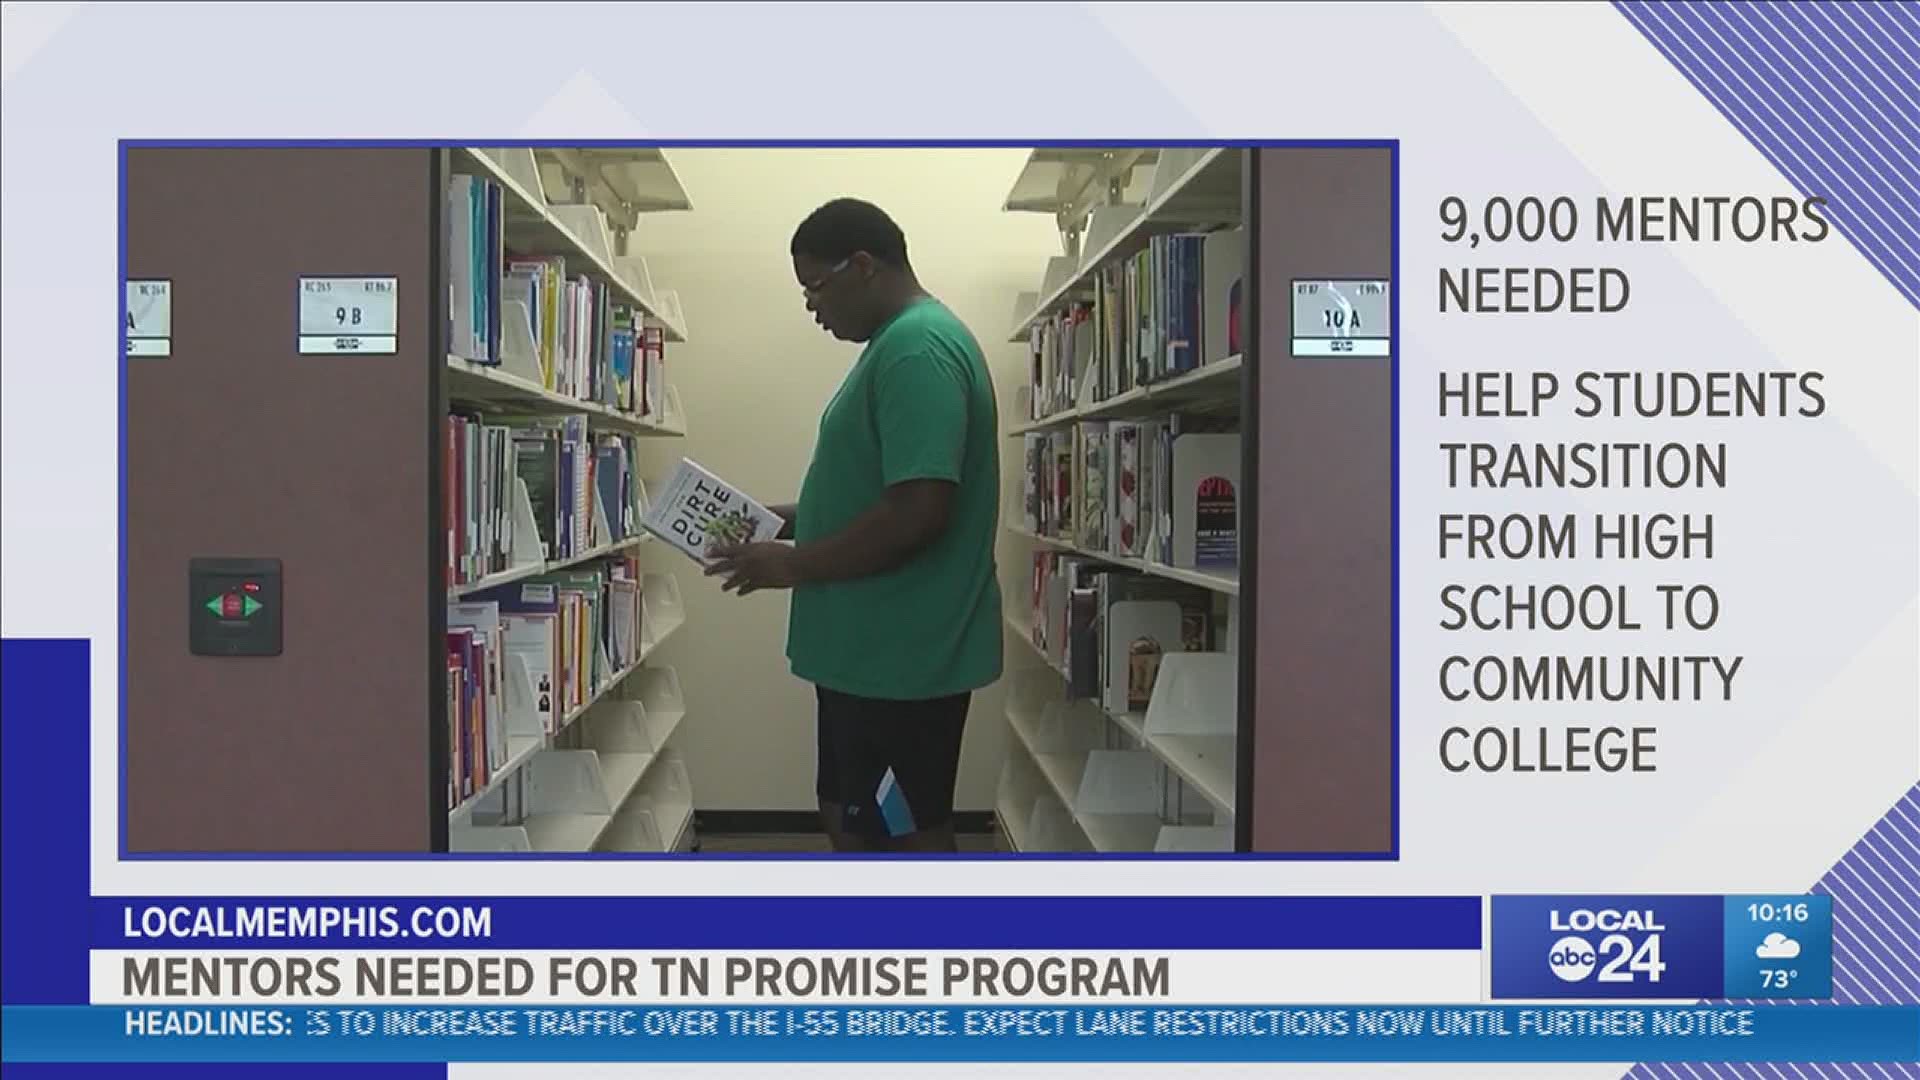 The program helps transition students from high school to free community college.